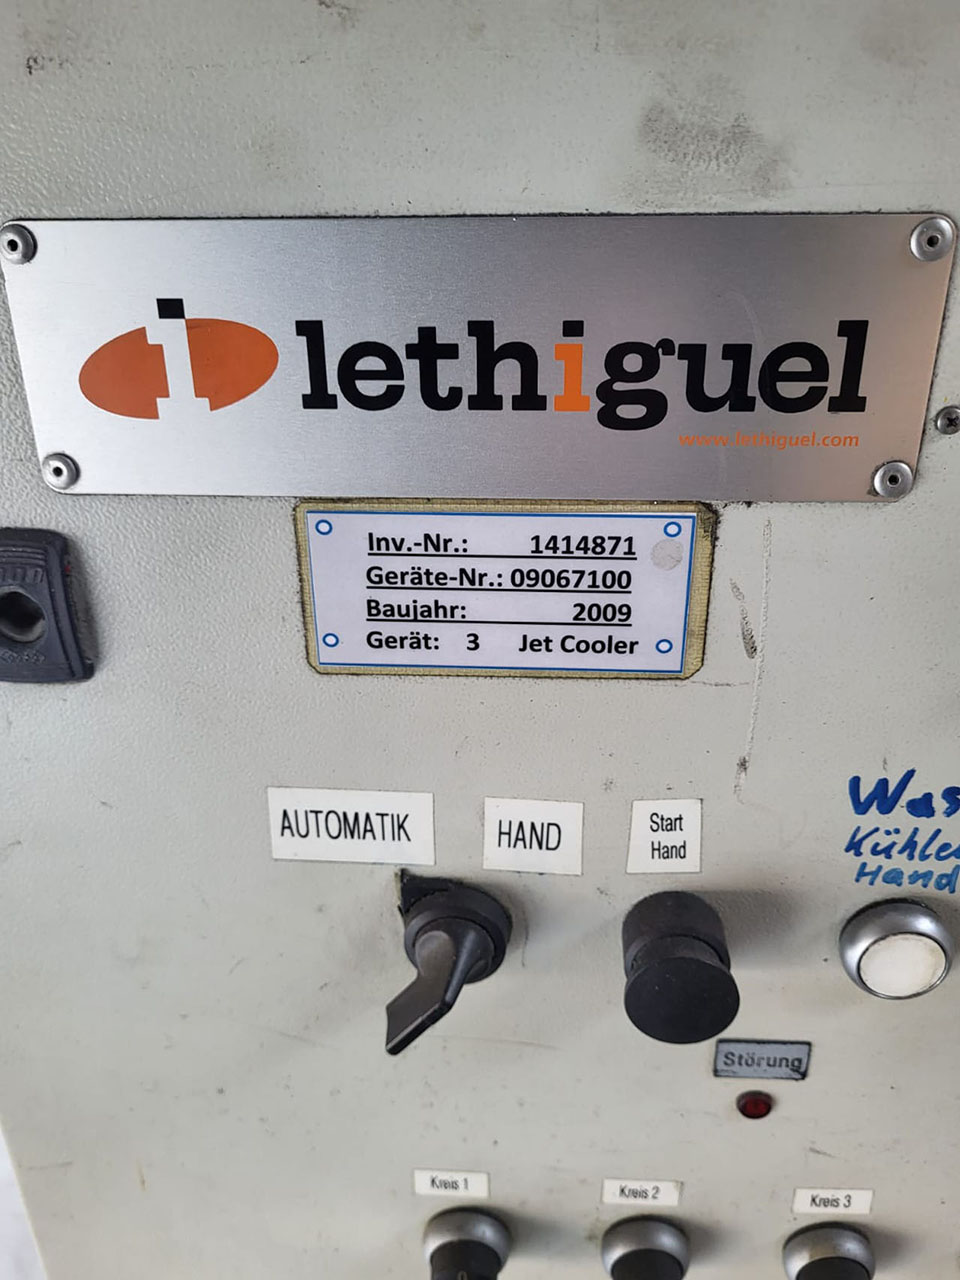 Lethiguel Thermat HDK4 mobile Jet-Cool unit ZU2183, used